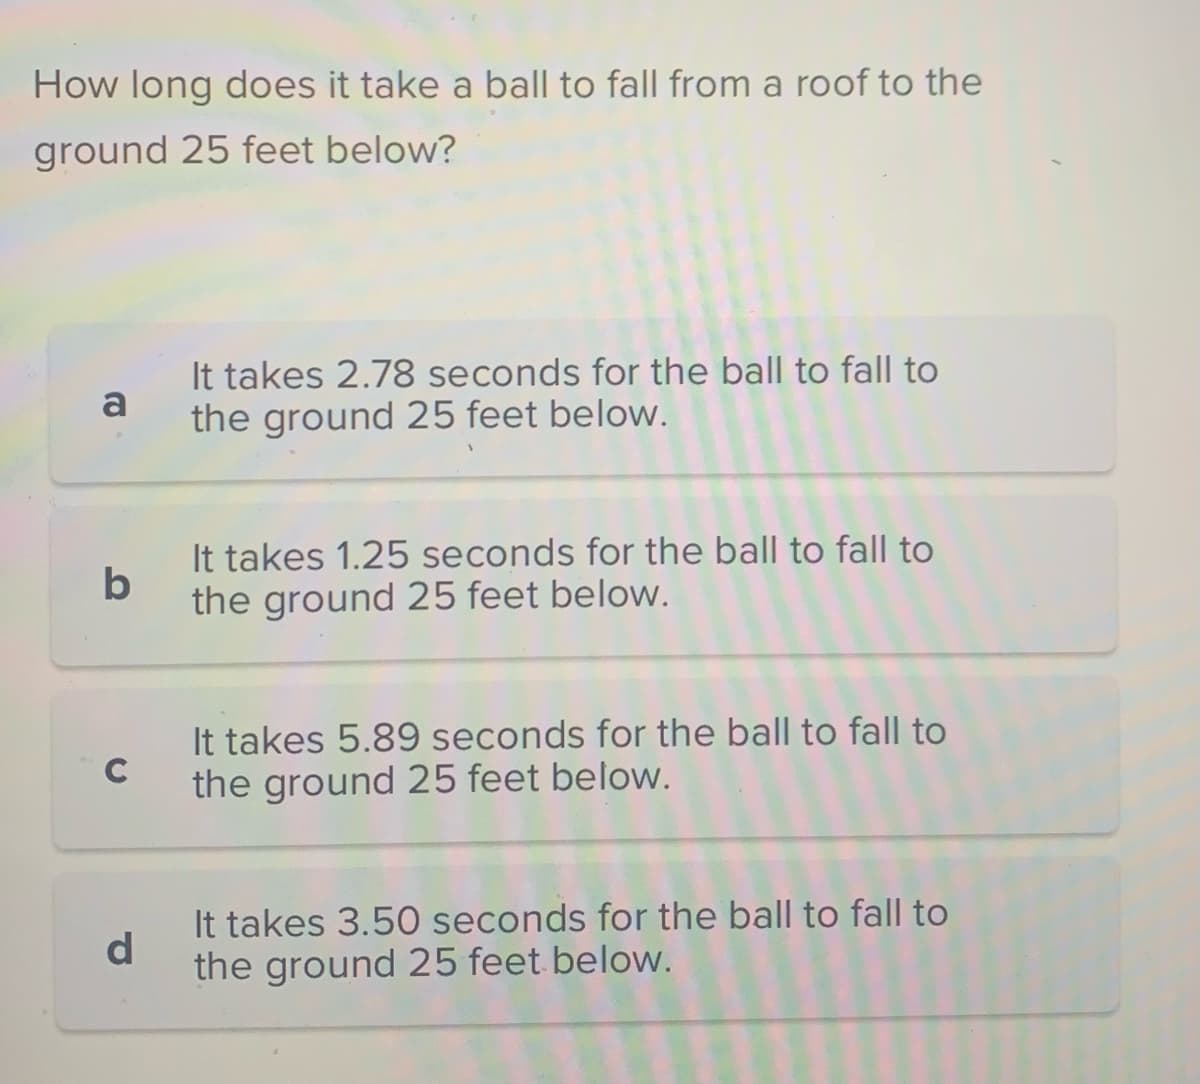 How long does it take a ball to fall from a roof to the
ground 25 feet below?
a
b
C
d
It takes 2.78 seconds for the ball to fall to
the ground 25 feet below.
It takes 1.25 seconds for the ball to fall to
the ground 25 feet below.
It takes 5.89 seconds for the ball to fall to
the ground 25 feet below.
It takes 3.50 seconds for the ball to fall to
the ground 25 feet below.